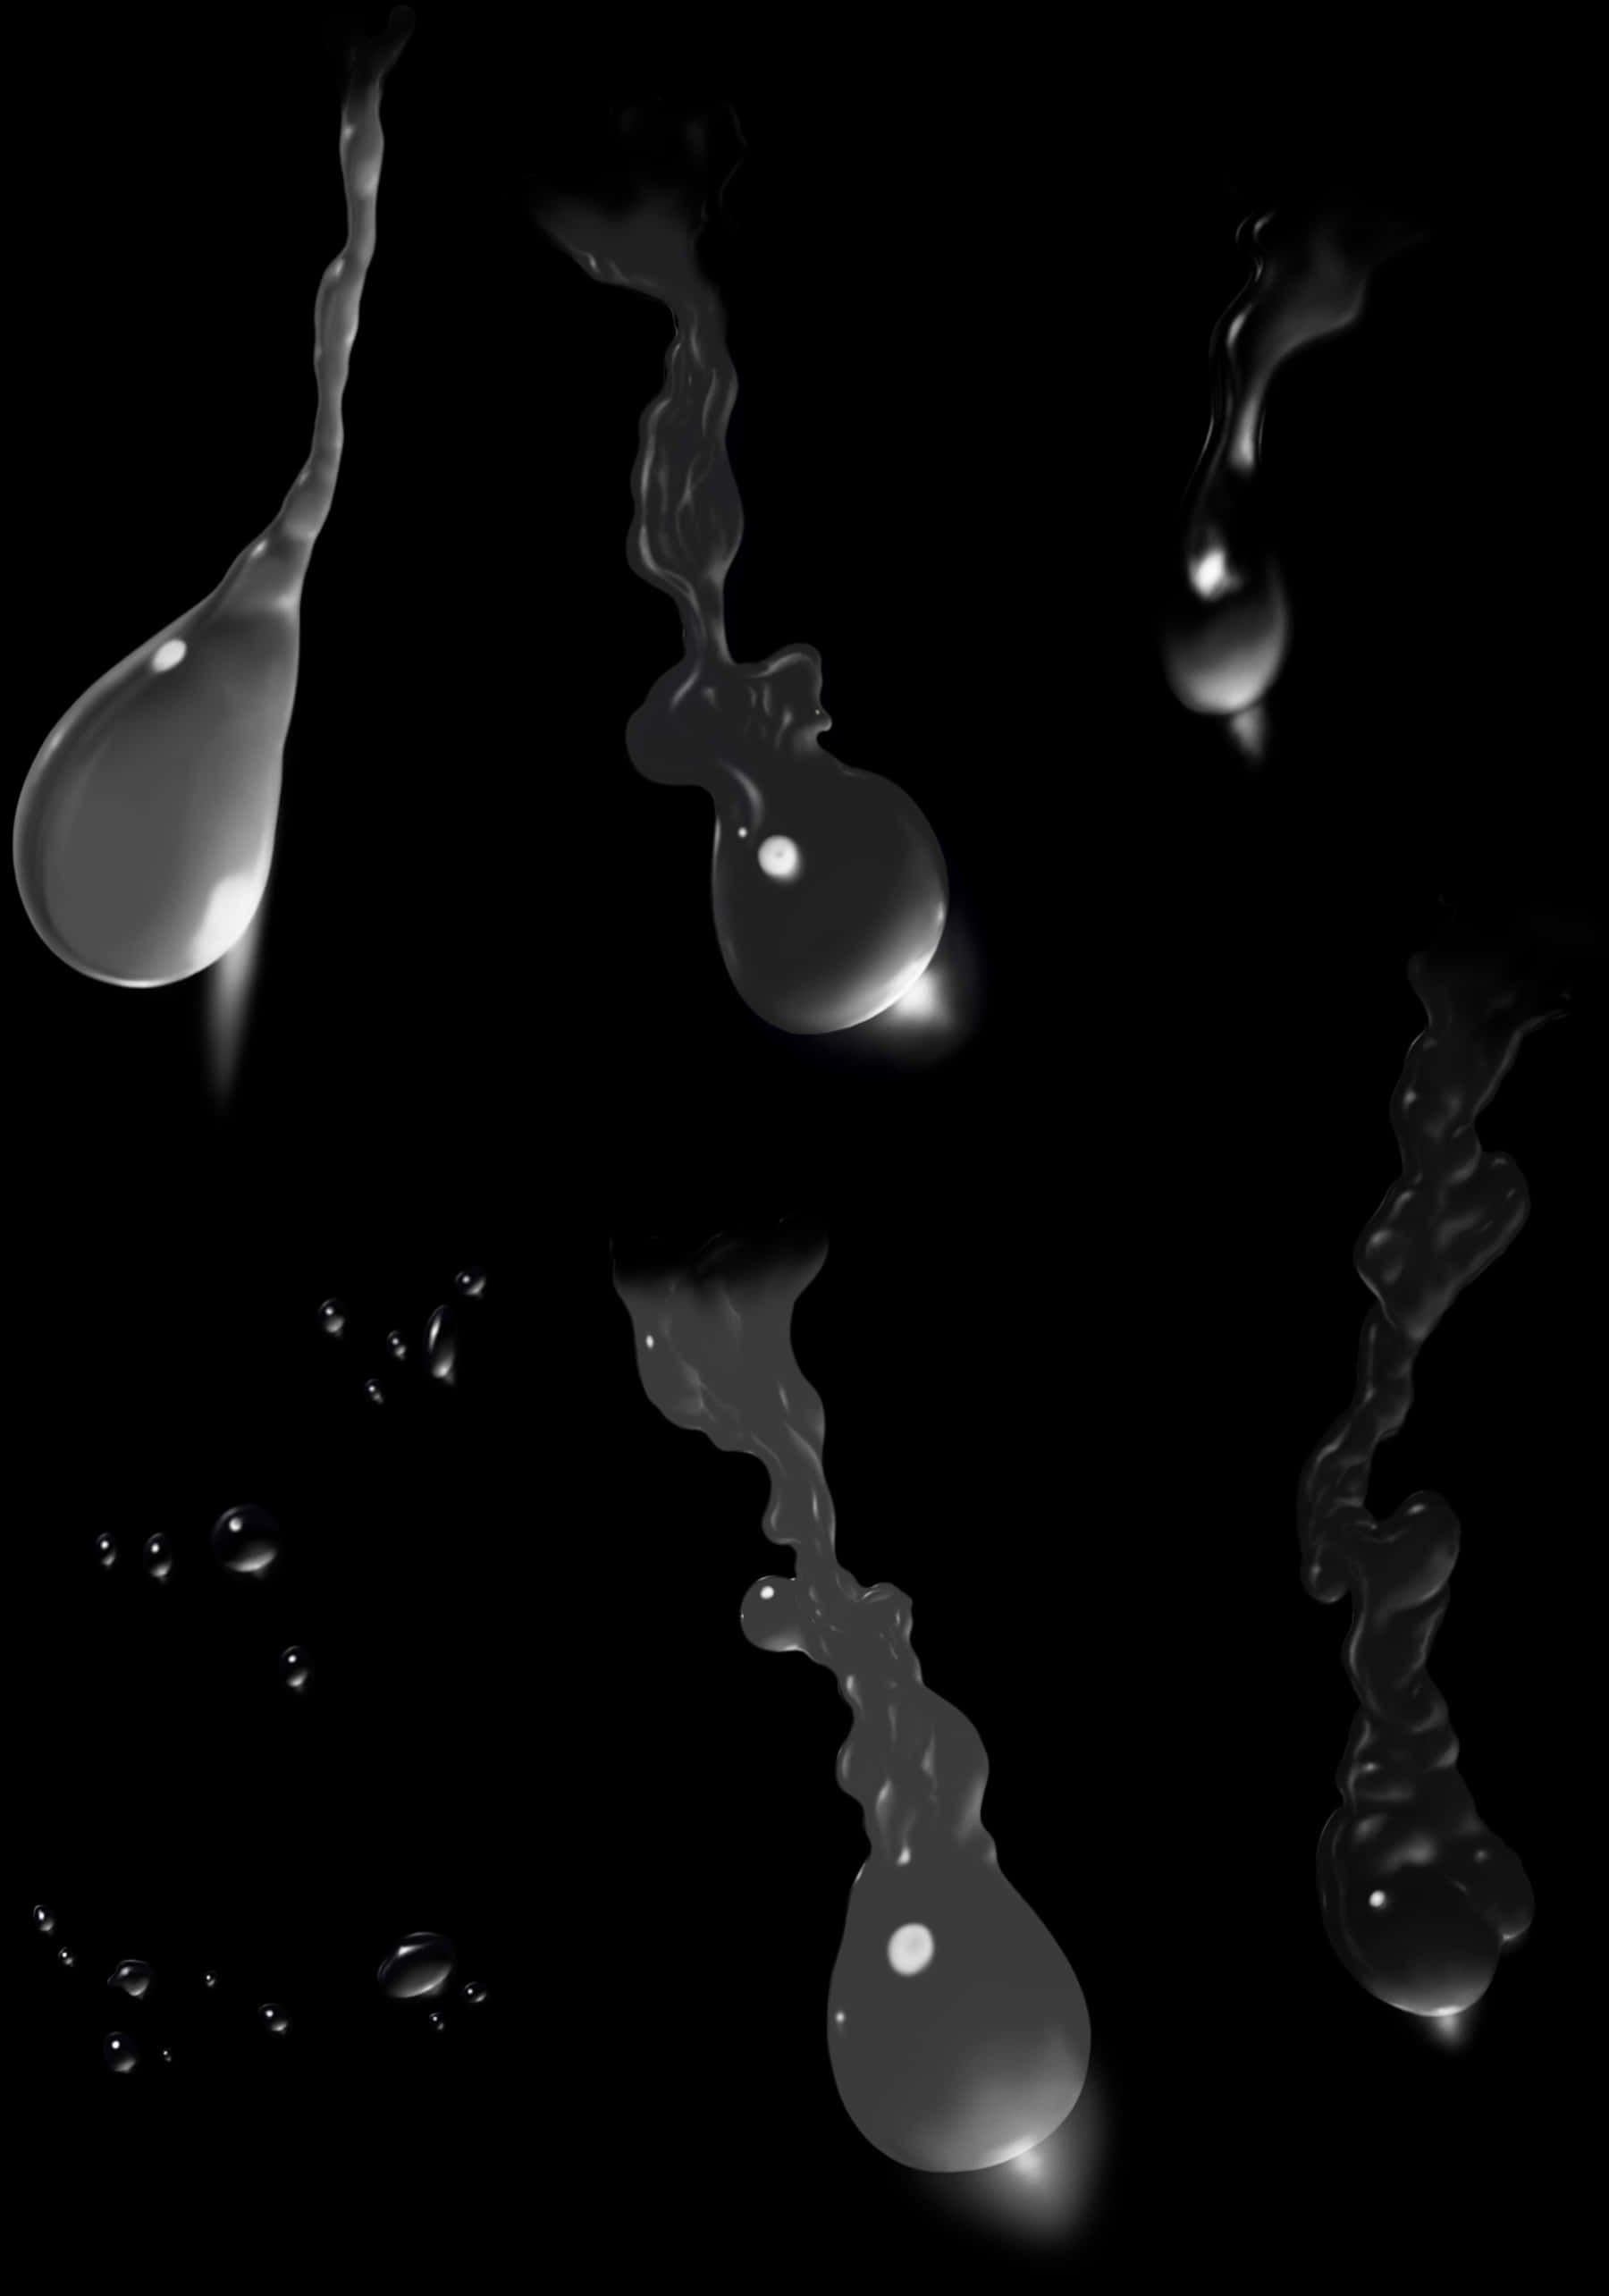 A Group Of Water Droplets